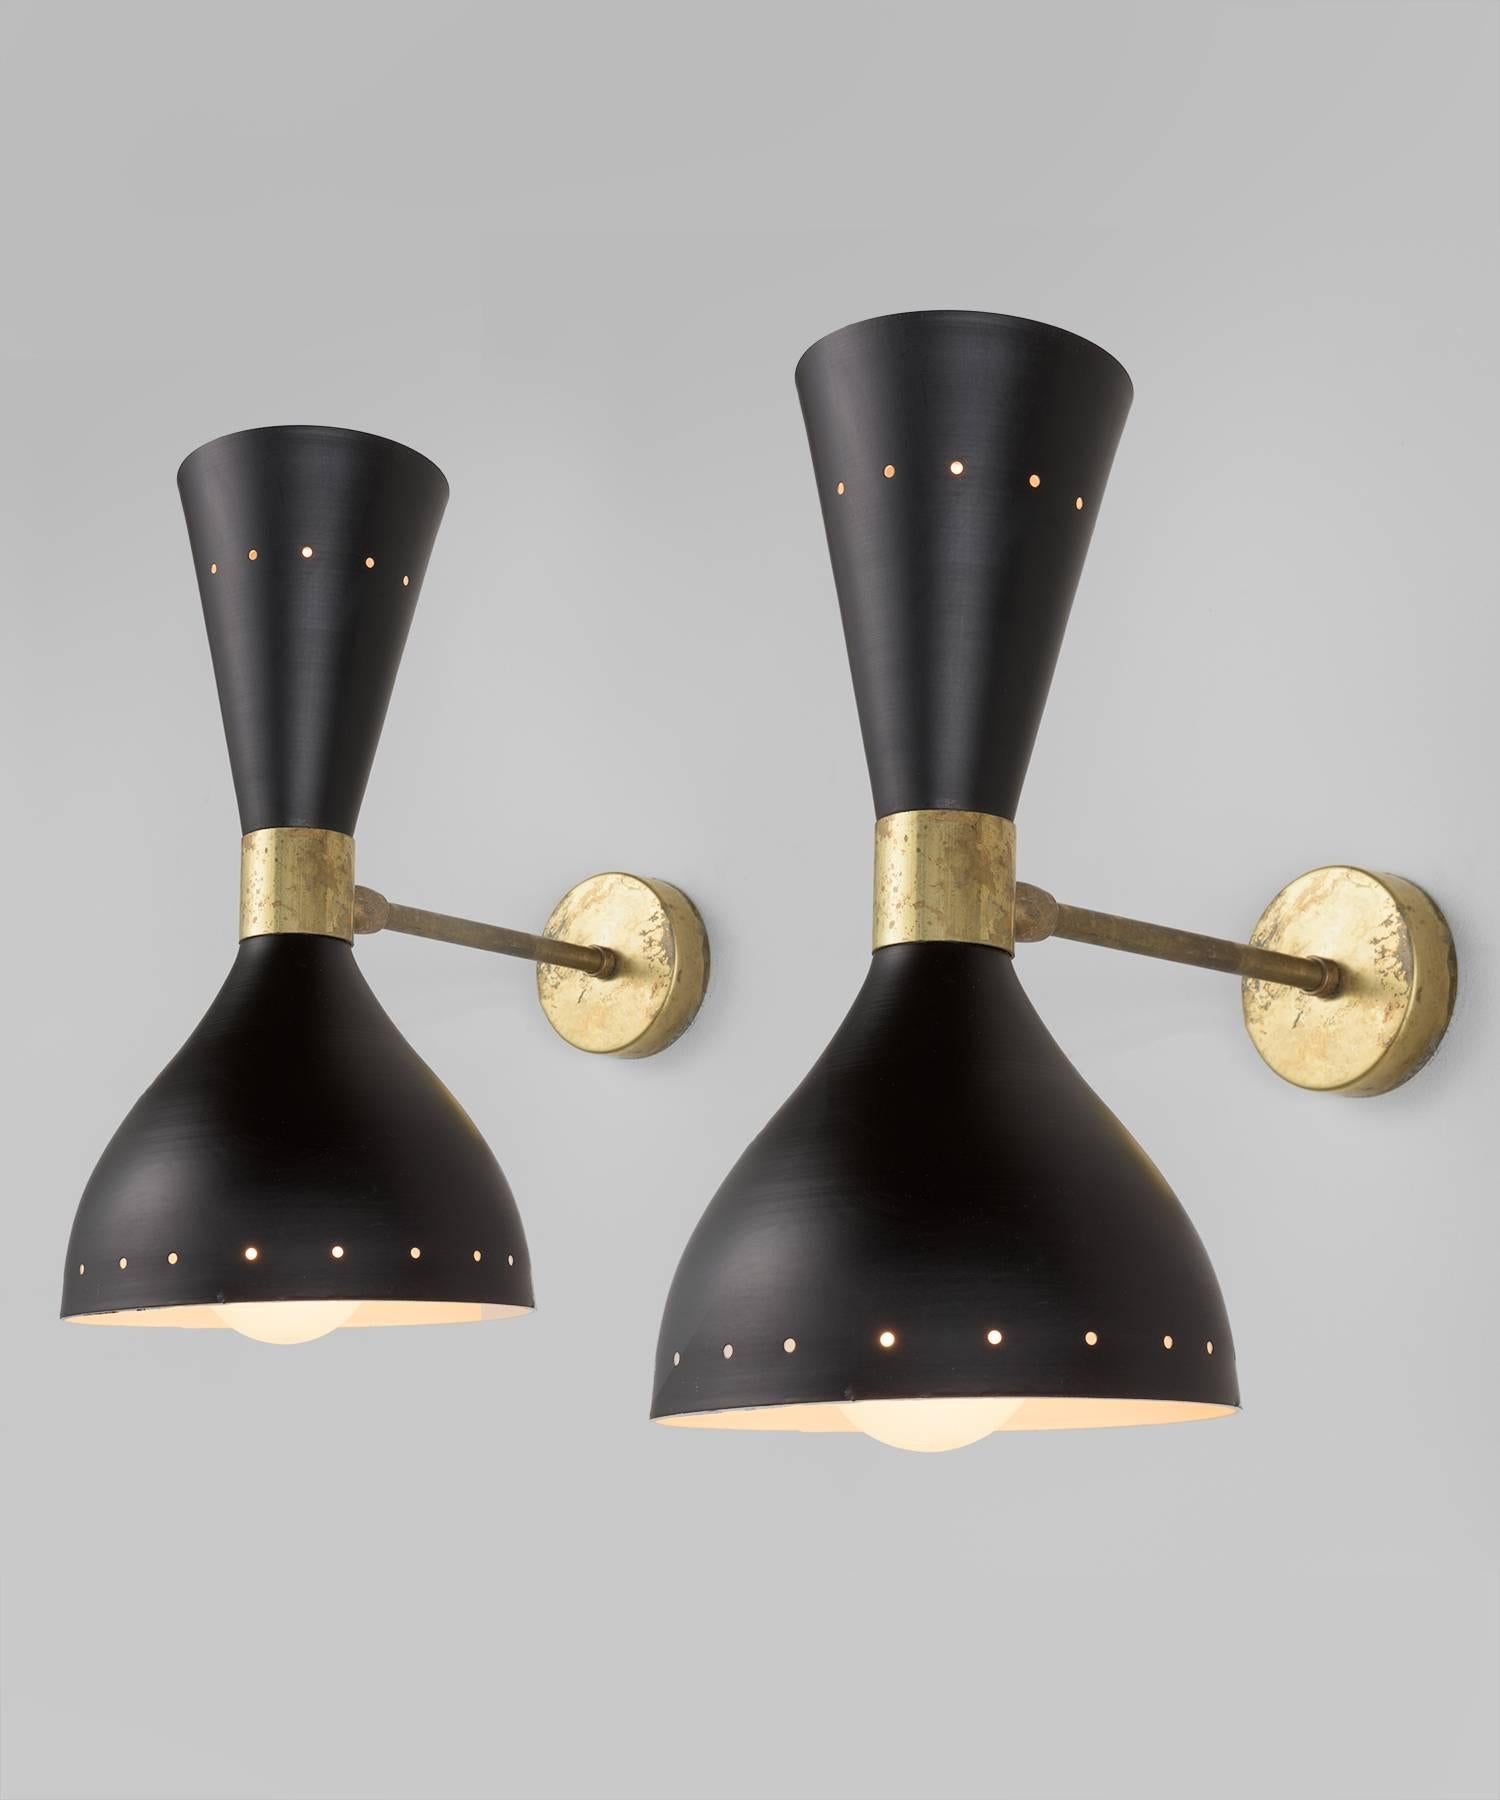 Black metal and brass modern sconce, circa 1960.

Perforated black lacquered shade, with articulating polished brass arm.